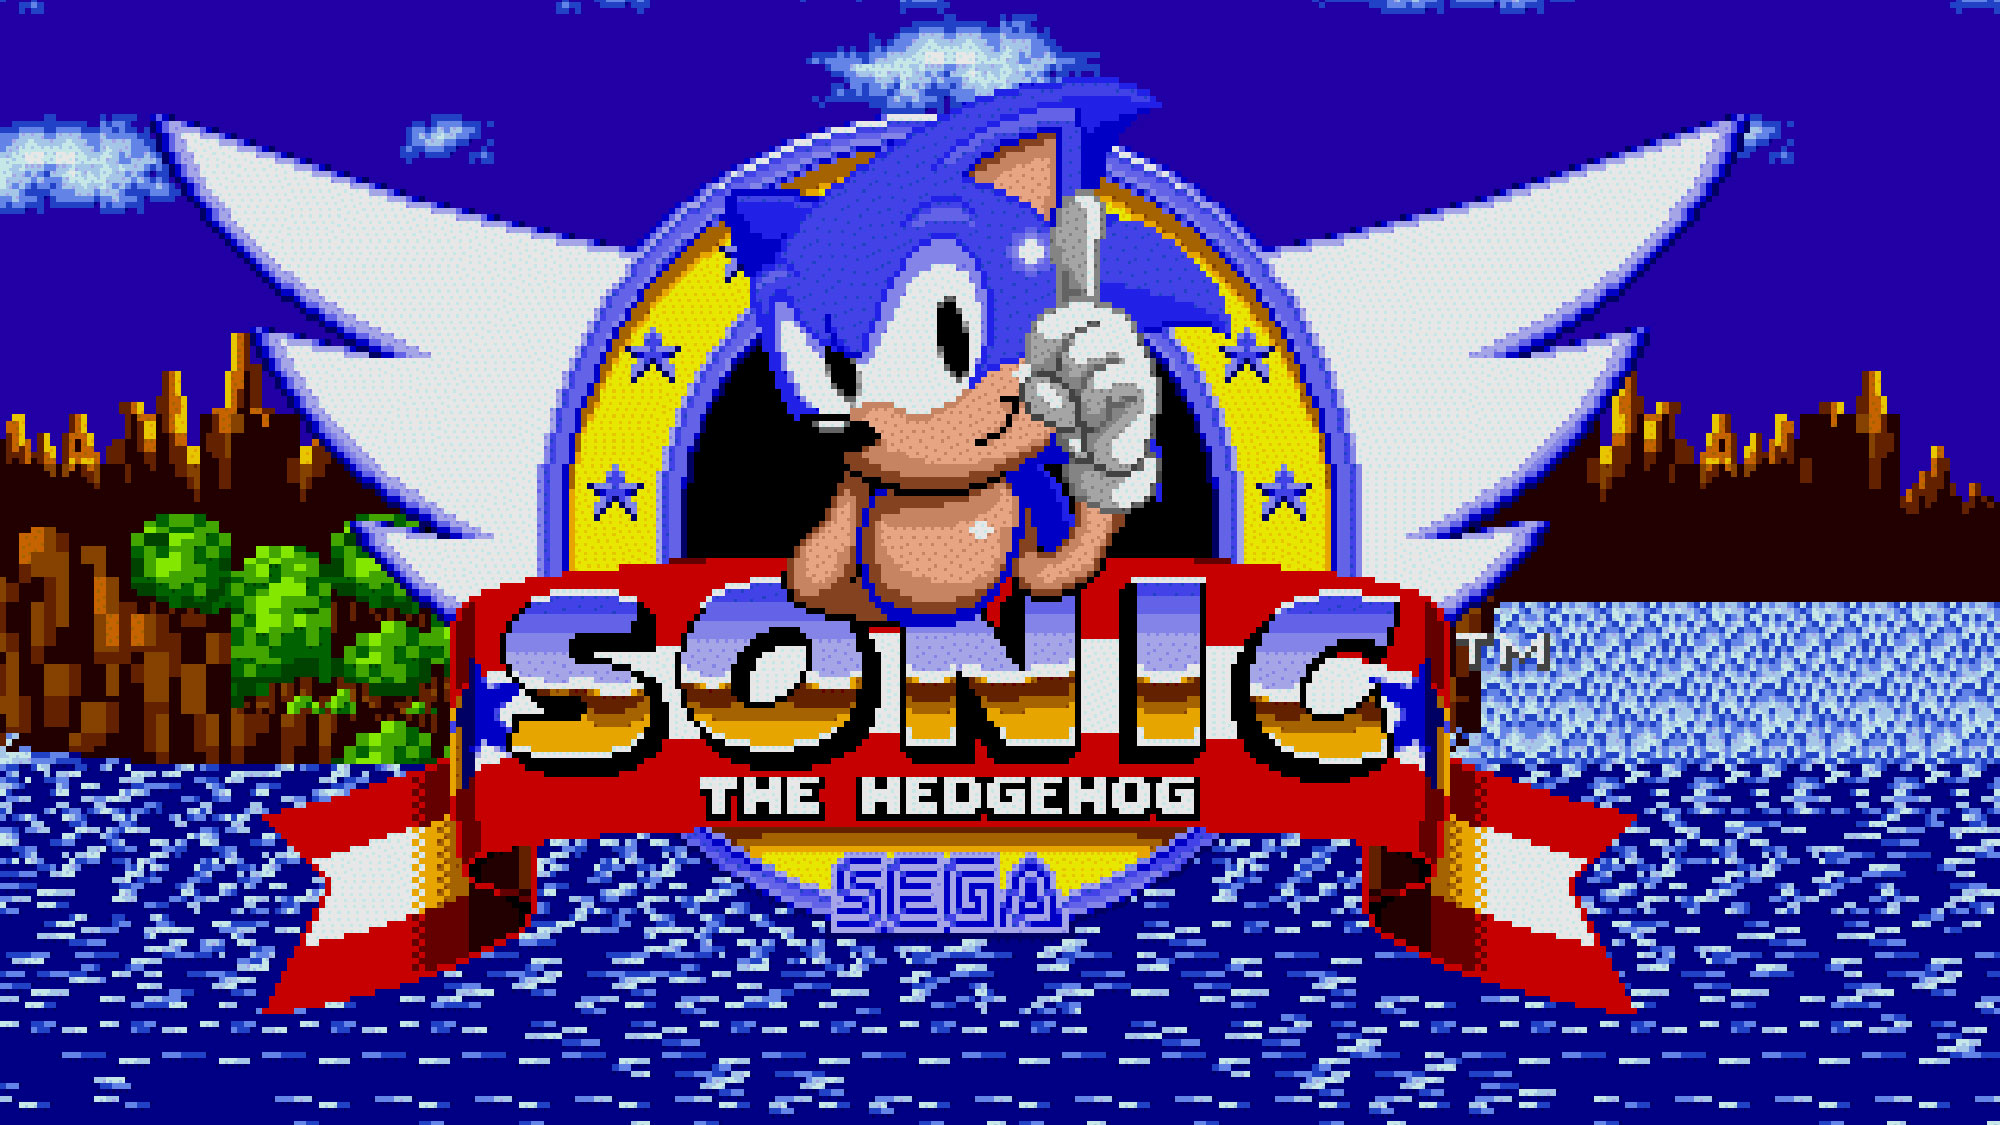 Play Sonic Classic Heroes - Rise of the Chaotix (Sonic the